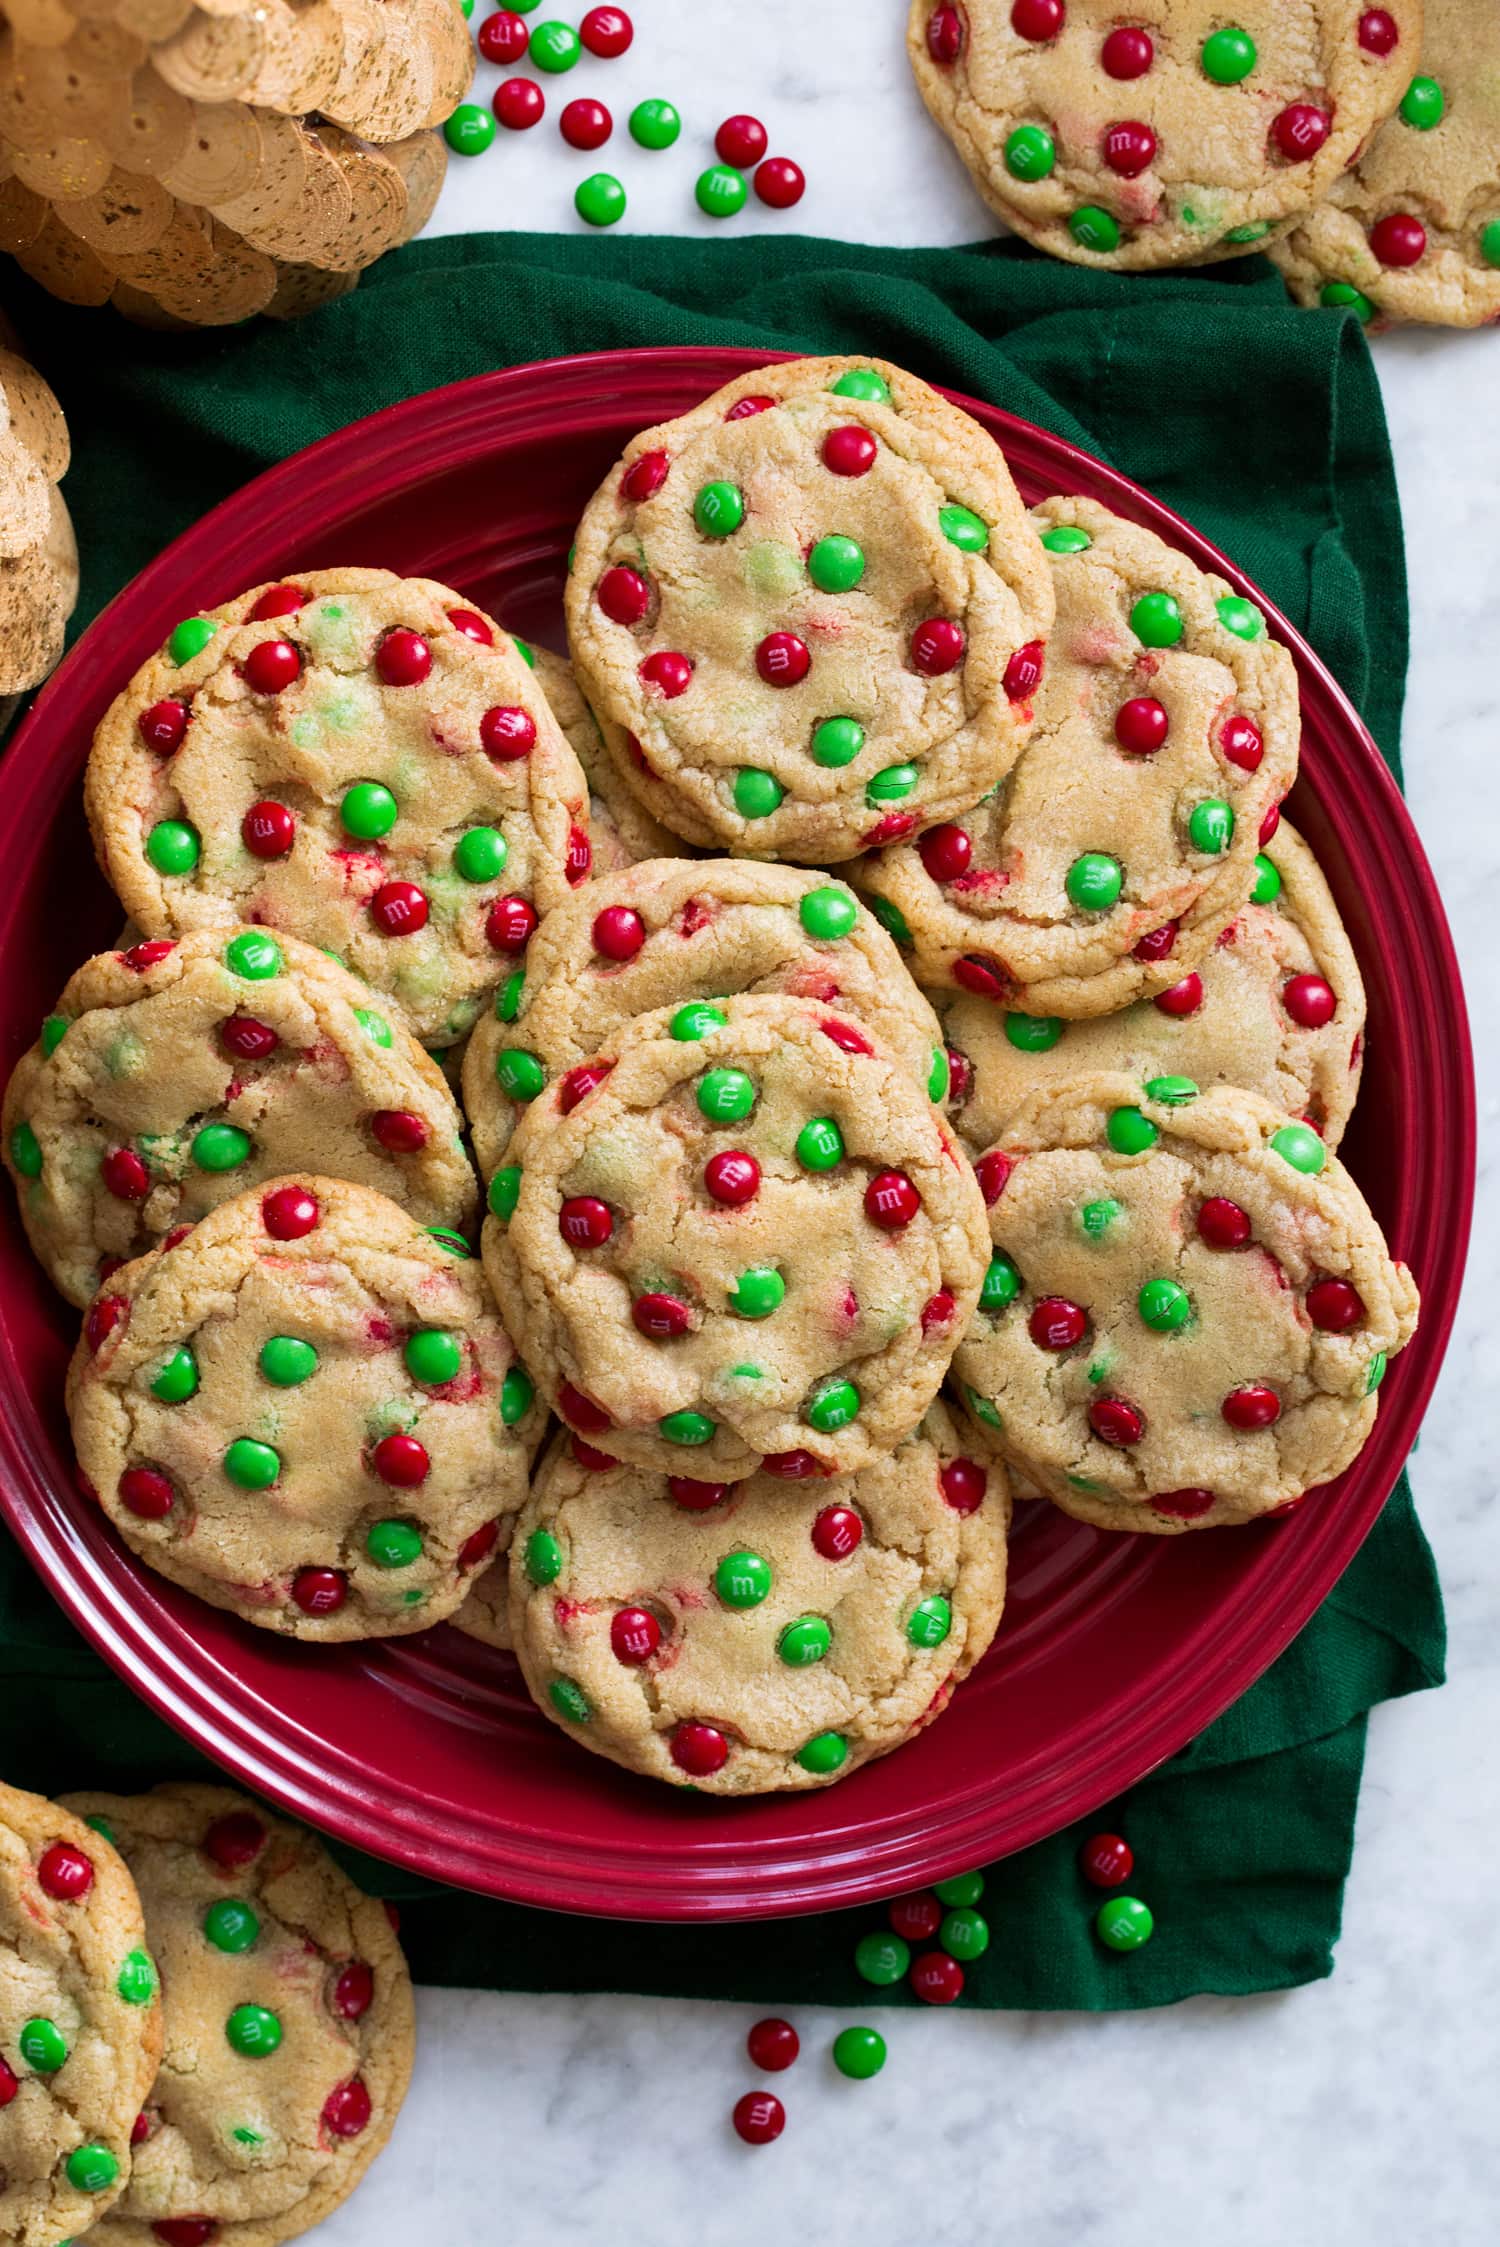 M and M Christmas cookies on a red plate over a green cloth.